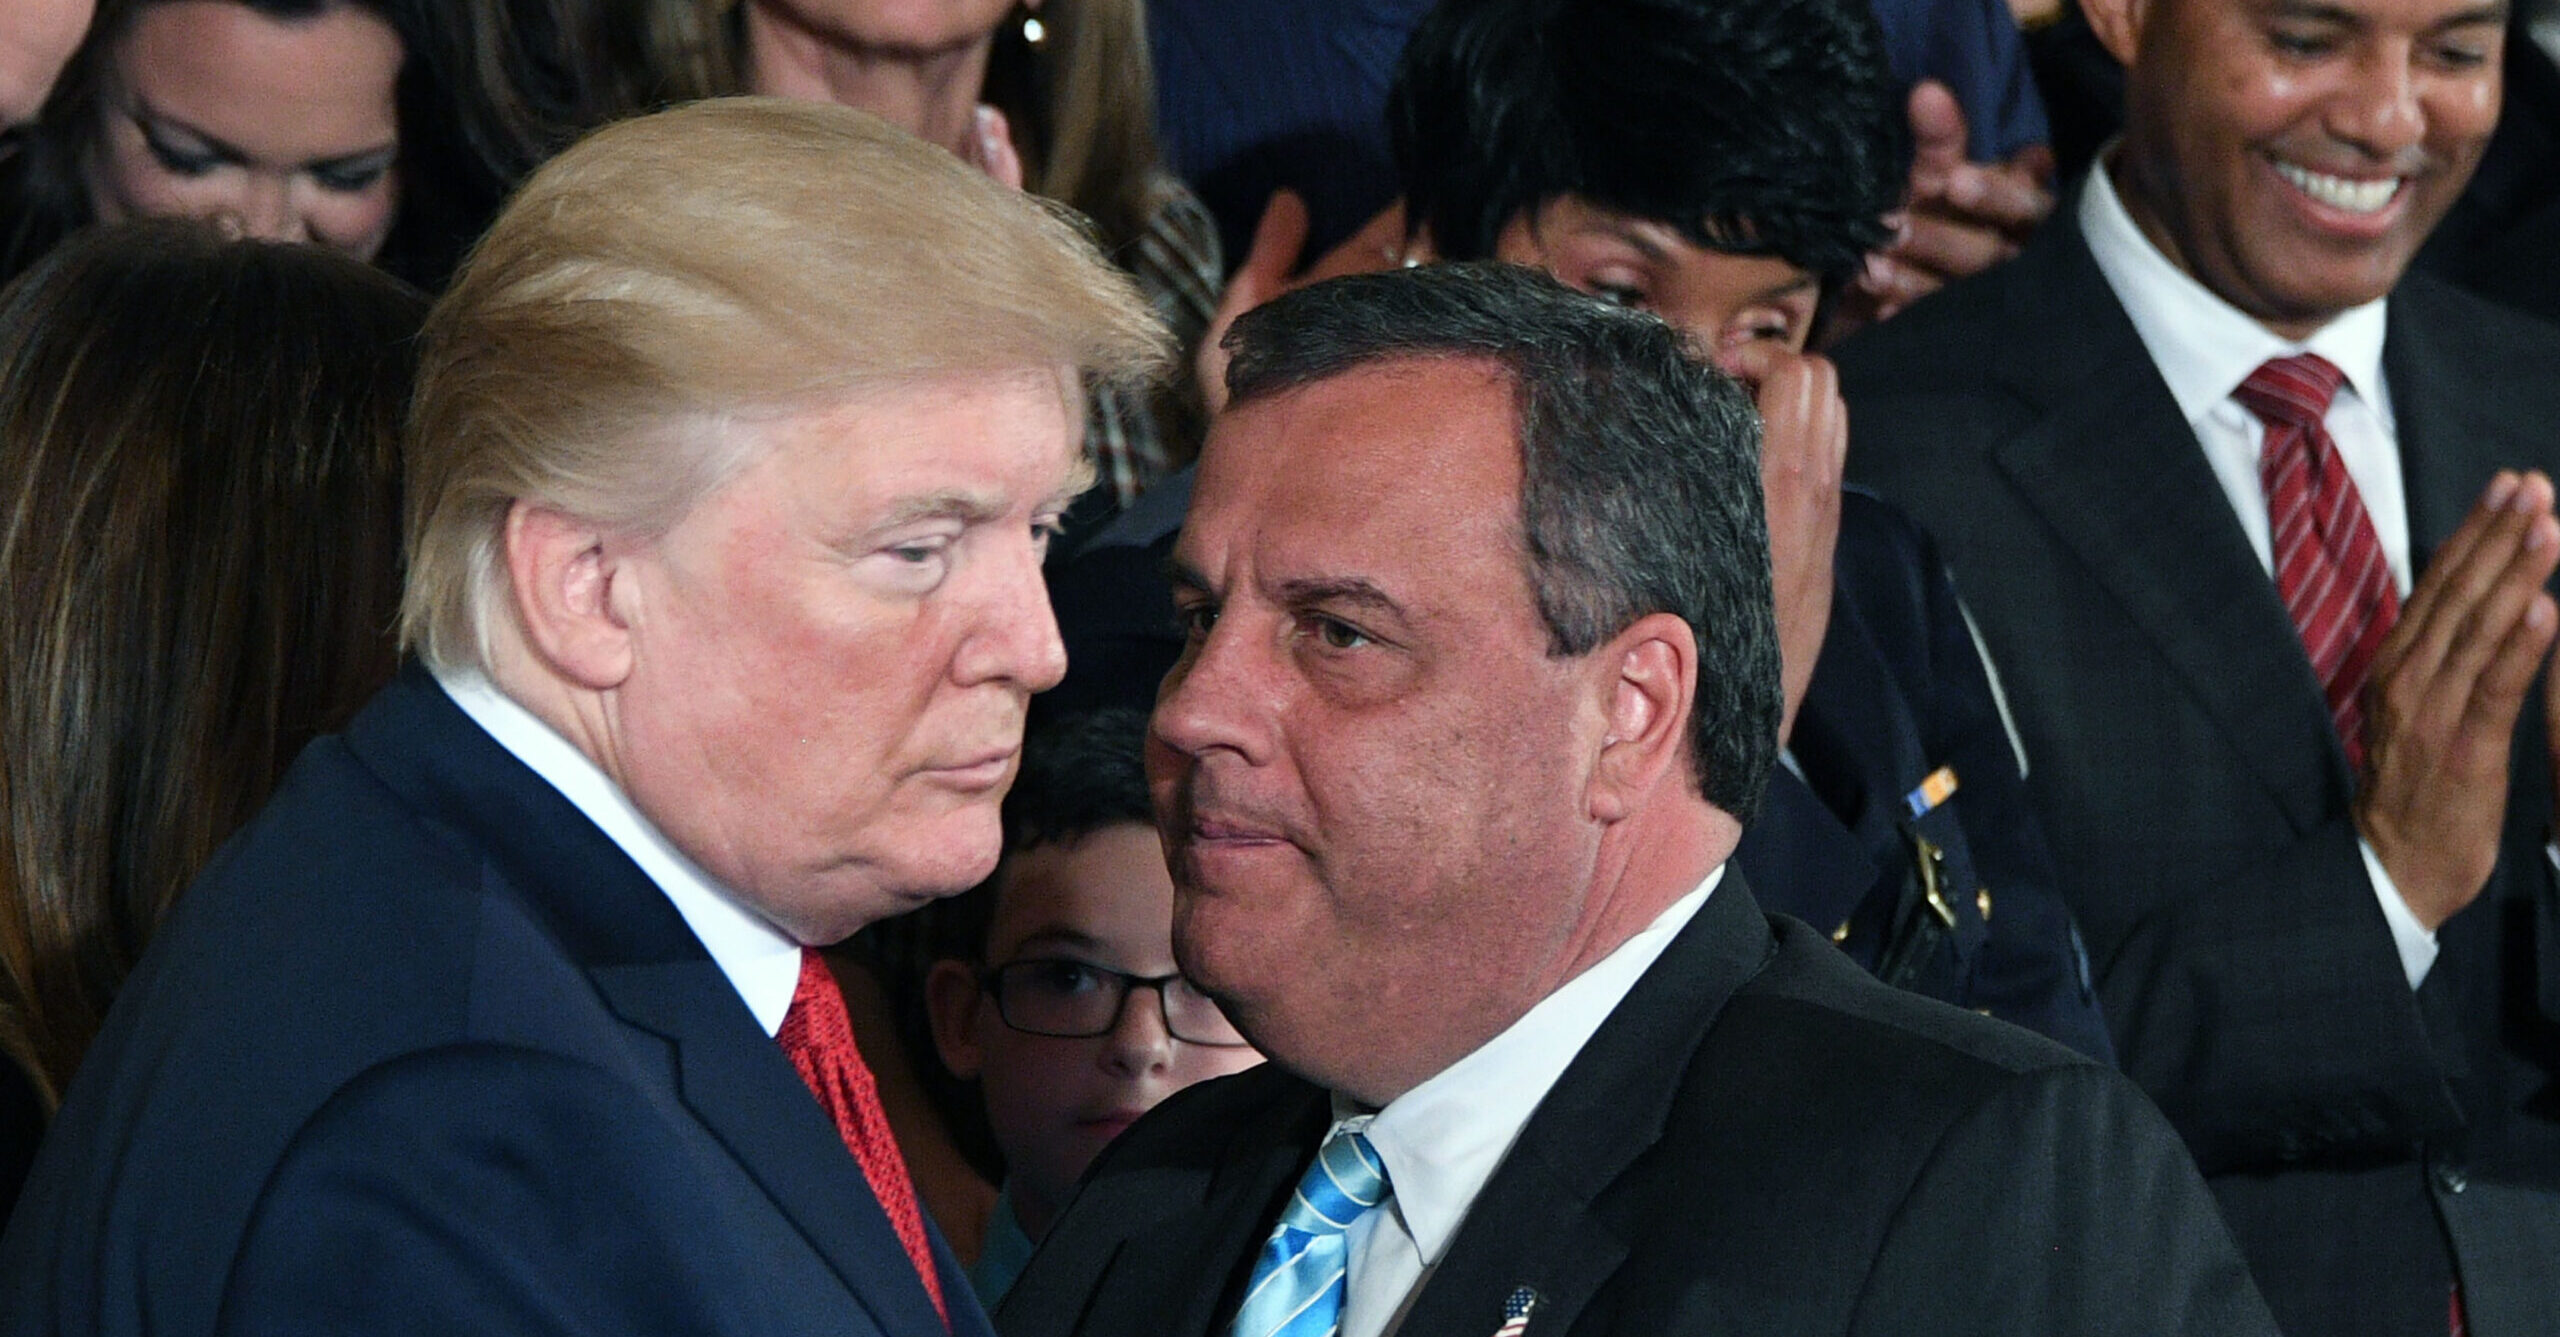 ‘This Is a Credible Candidate’: Chris Christie in Disbelief After Trump Claims He Could Declassify Docs by ‘Thinking’ It